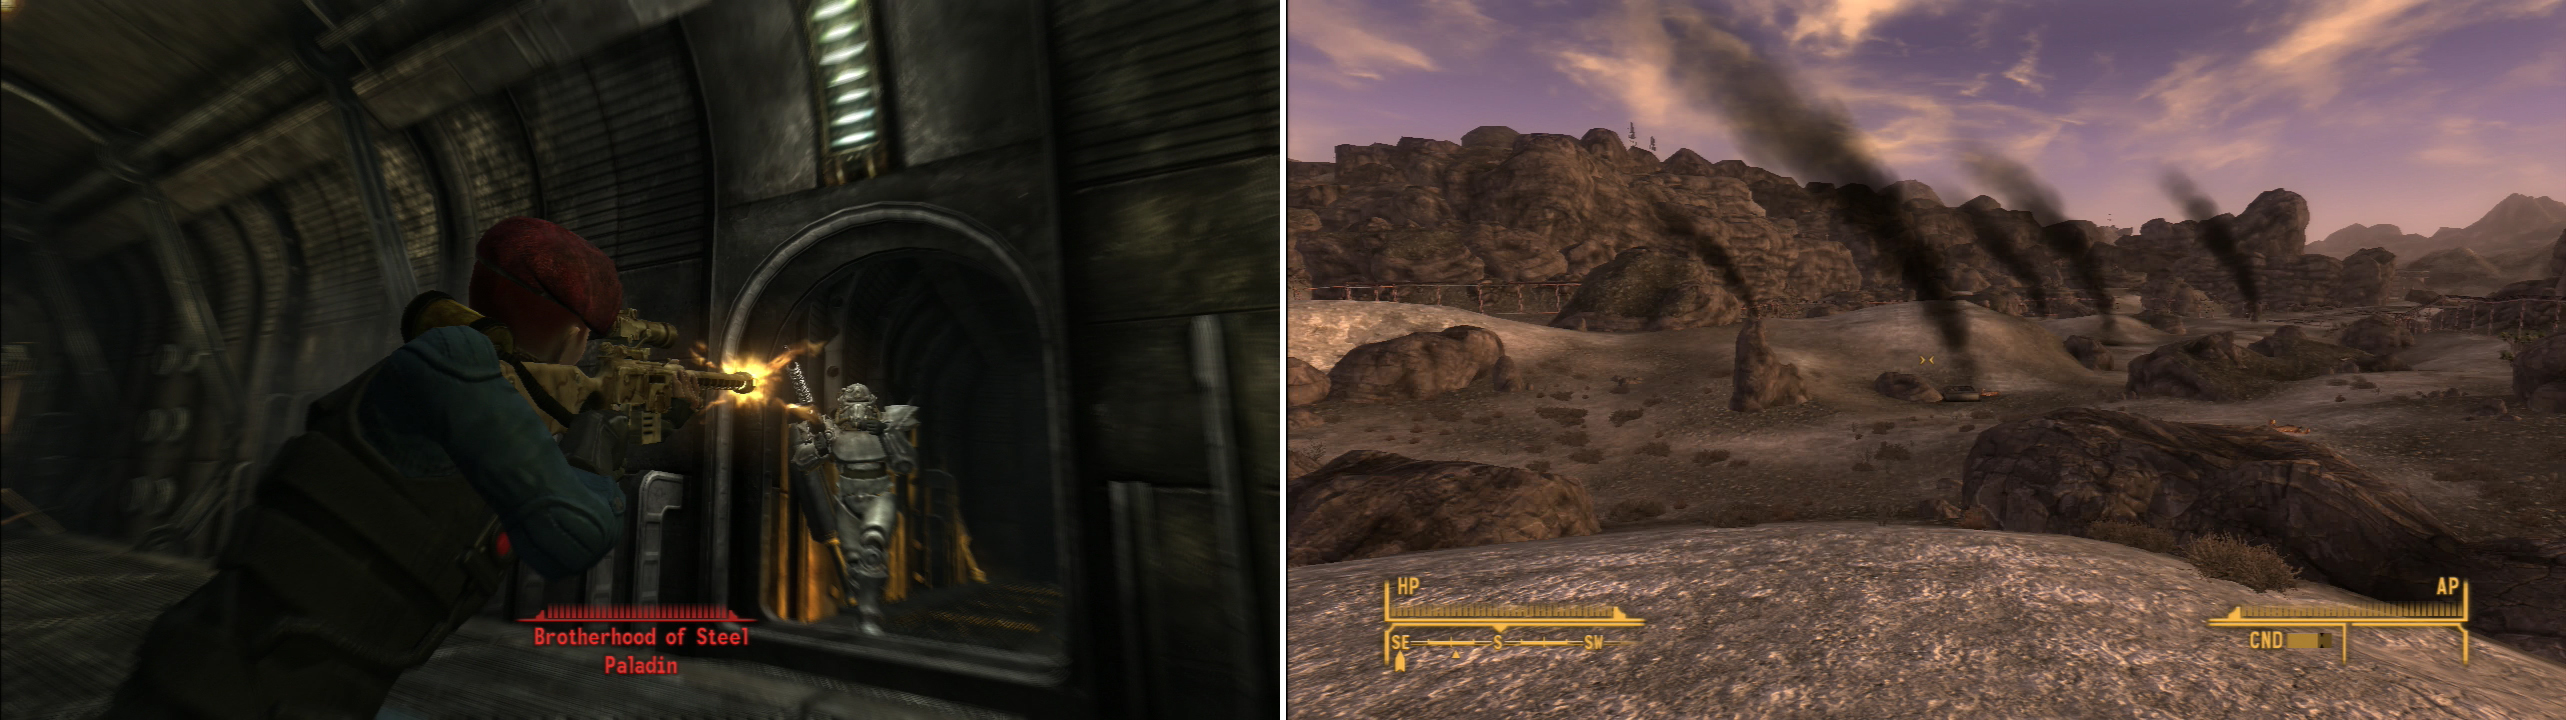 If you can’t be bothered to activate the self destruct mechanism (why waste a perfectly good bunker?) you can just murder all the Brotherhood of Steel members (left). The black plumes signal the destruction of the Hidden Valley bunker (right).